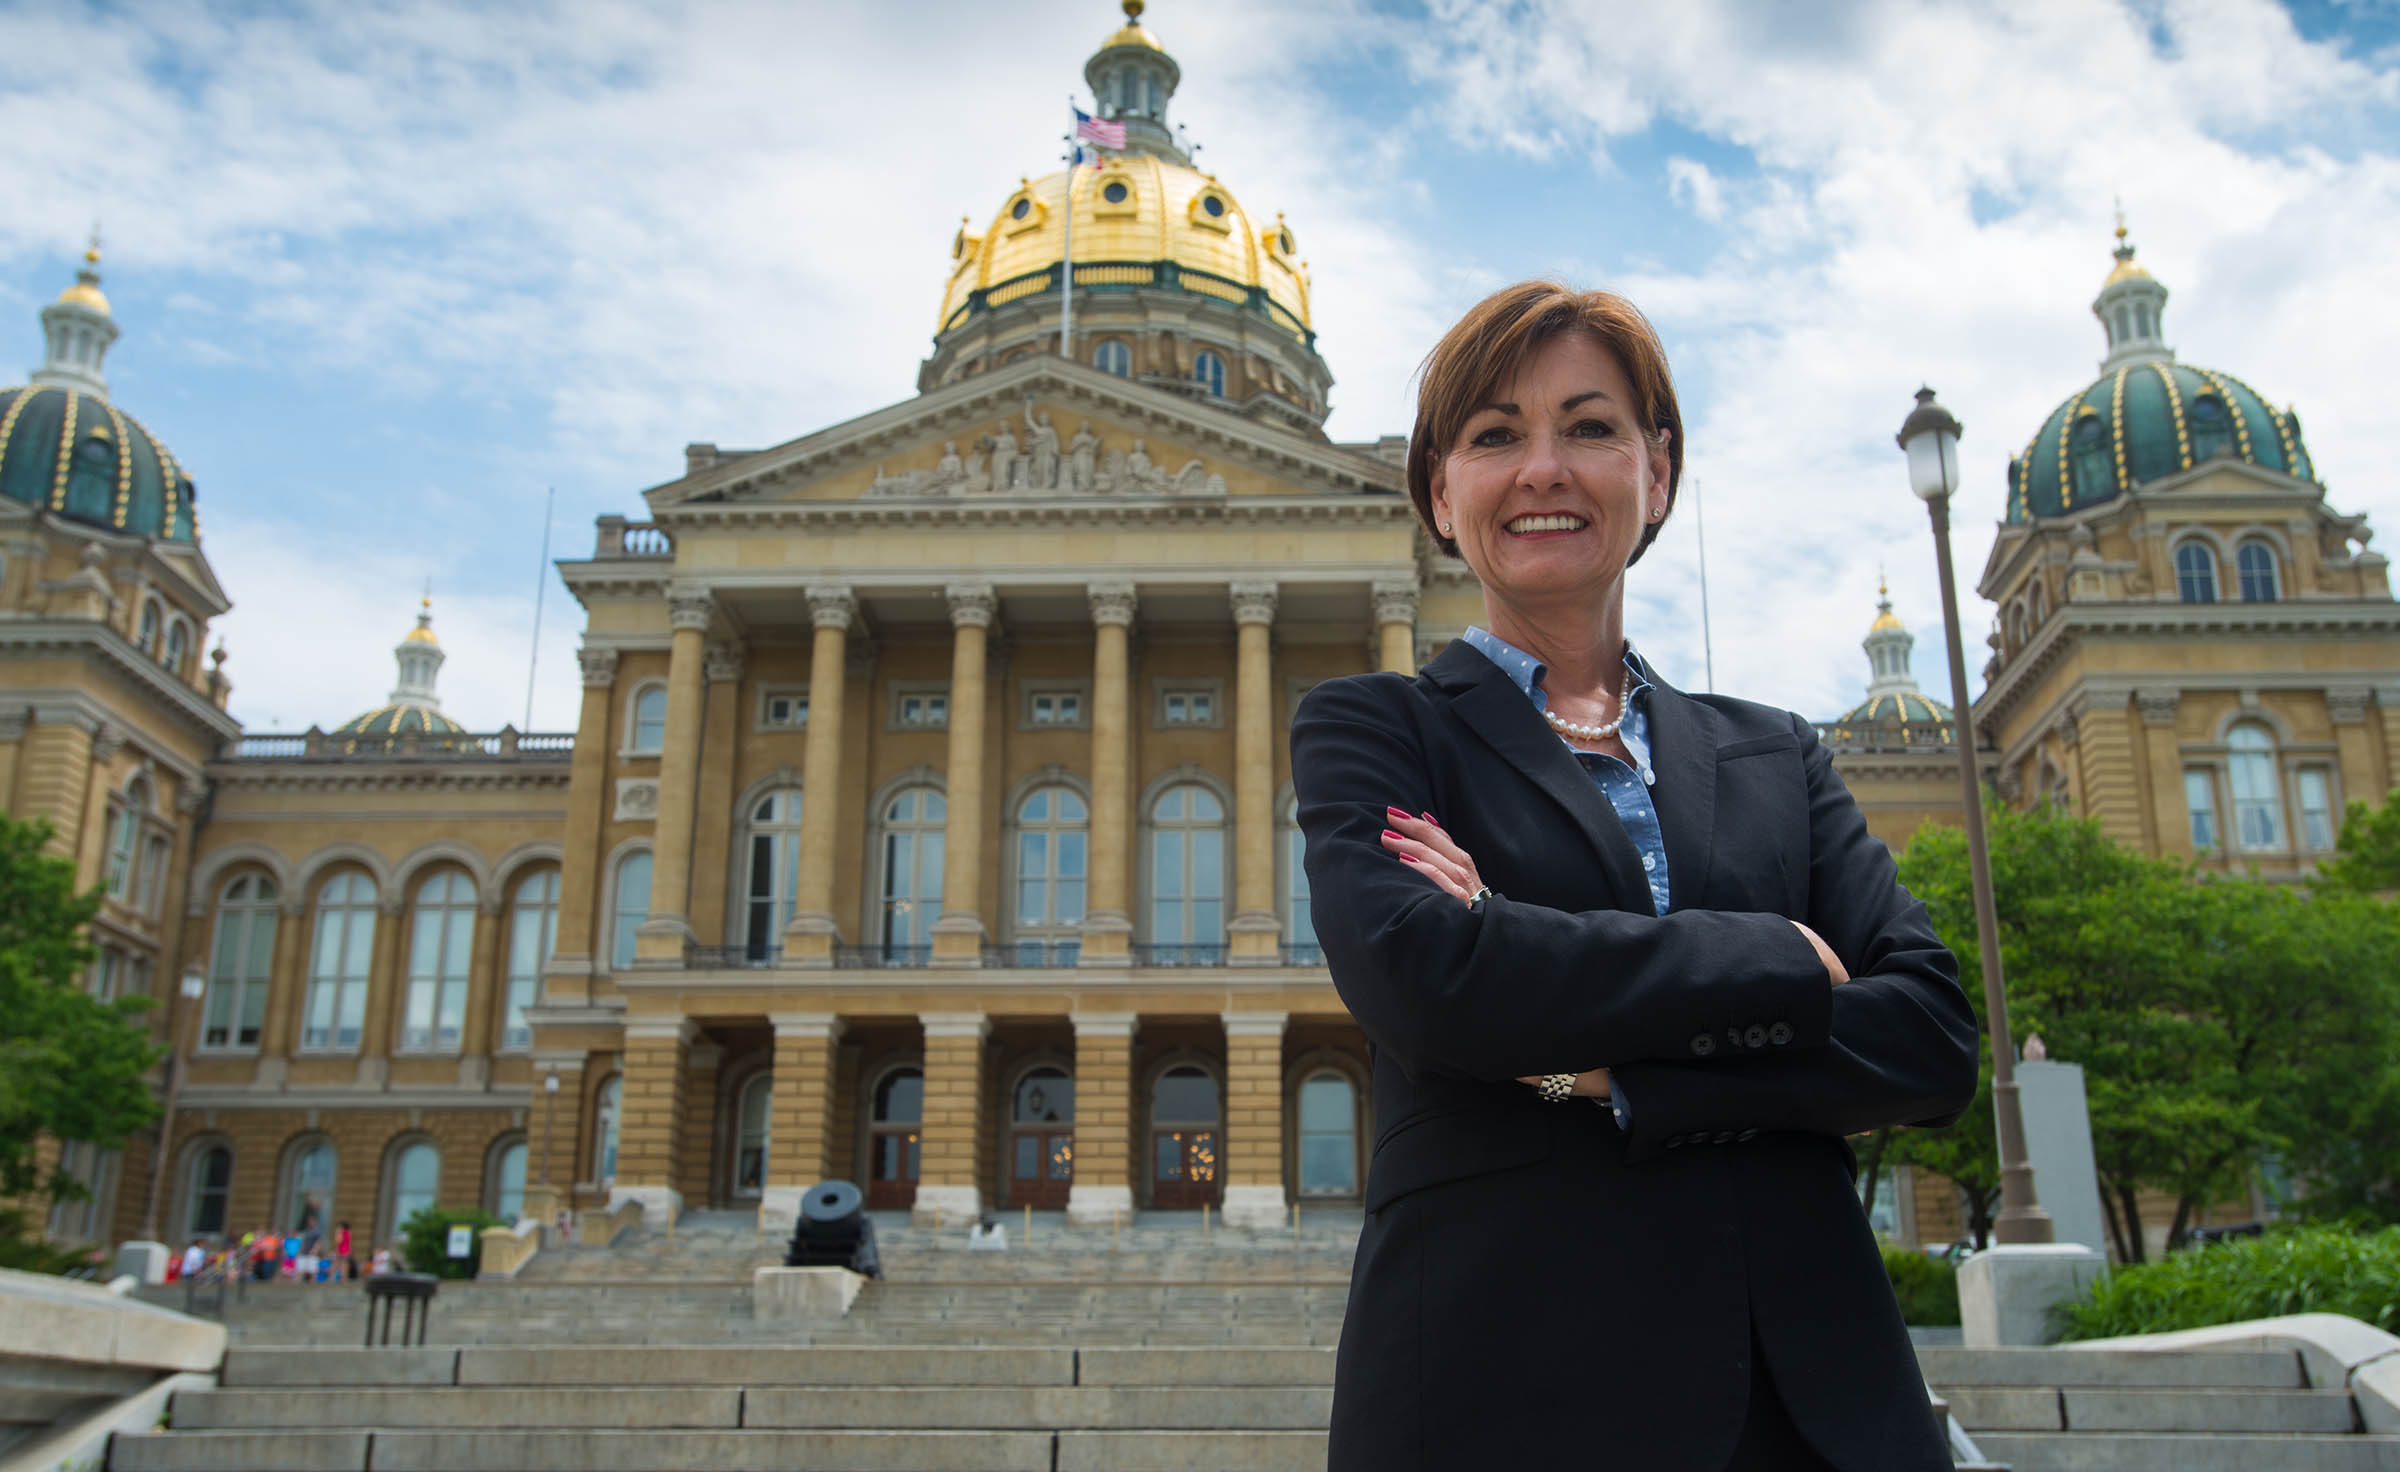 Governor Reynolds poses in front of the state capitol b